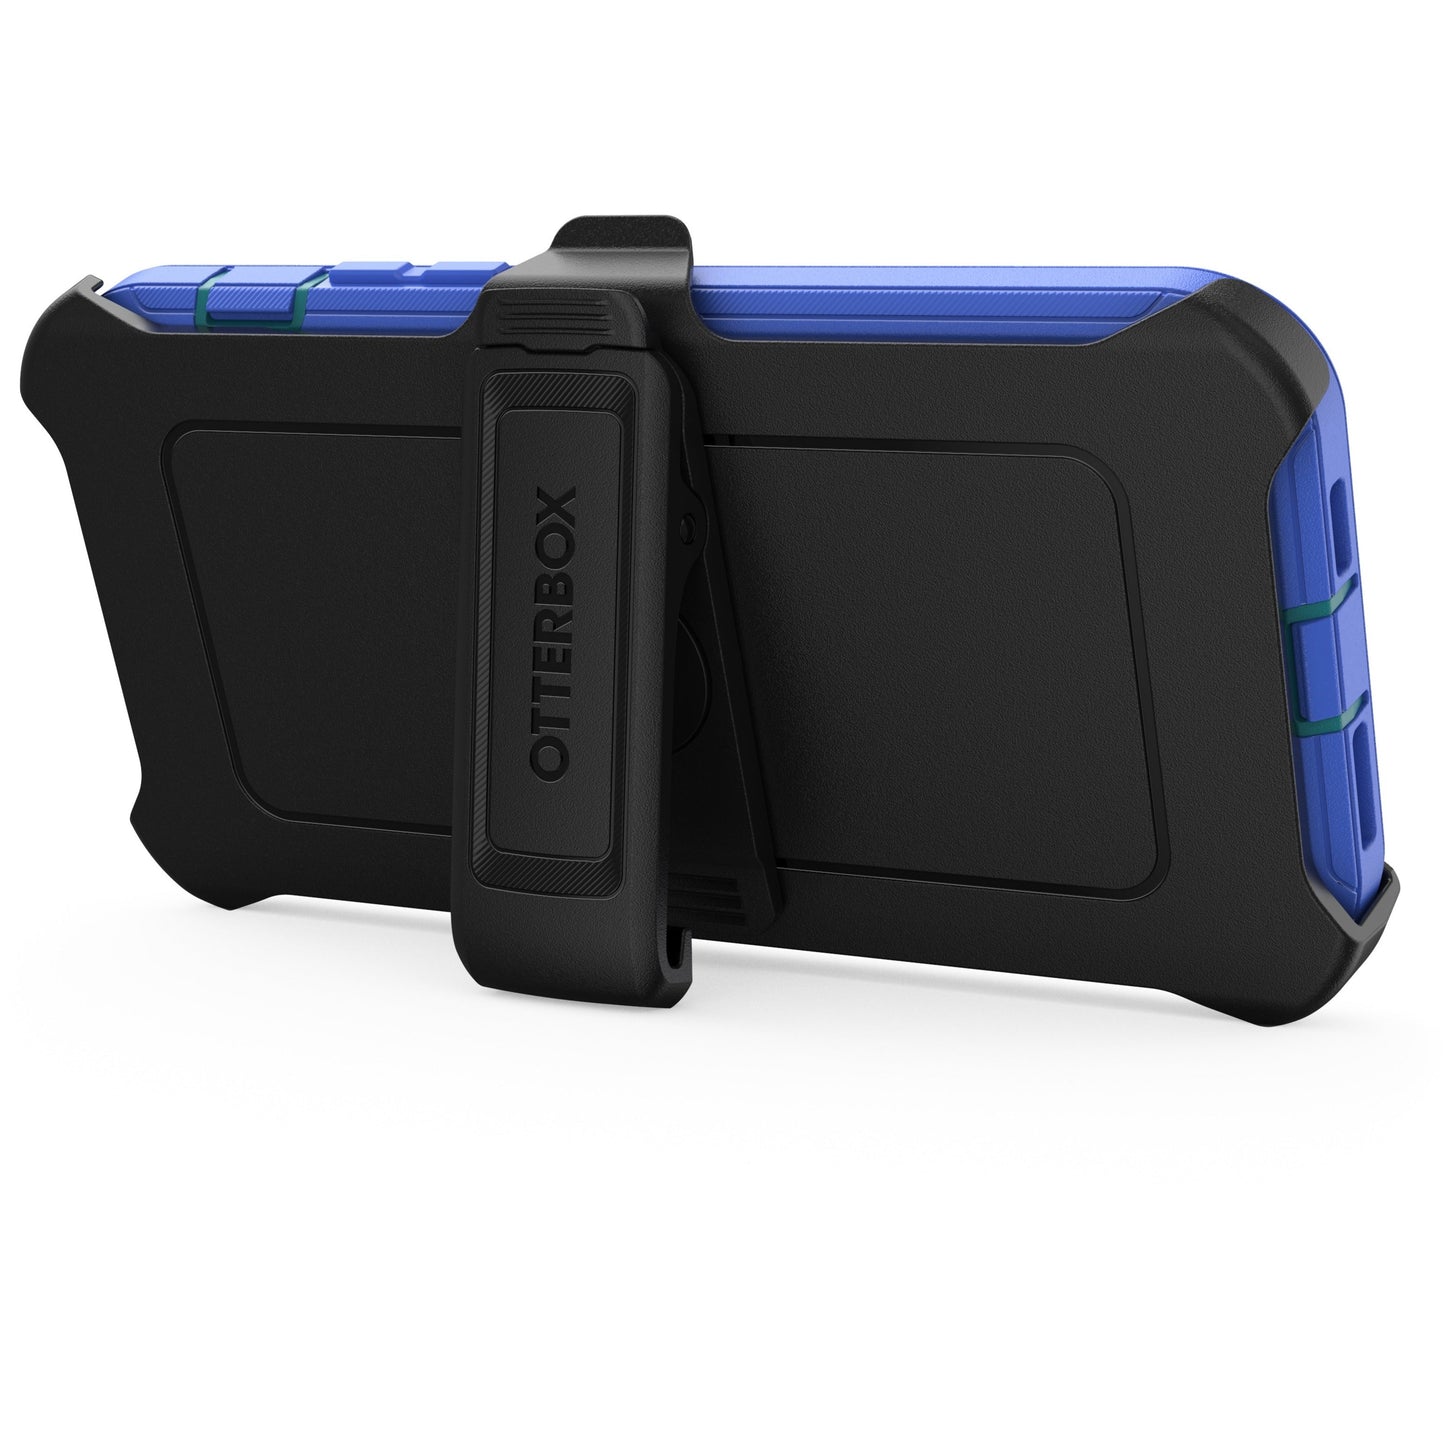 OtterBox Defender Rugged Carrying Case (Holster) Apple iPhone 14 Pro Max Smartphone - Rain Check (Blue)